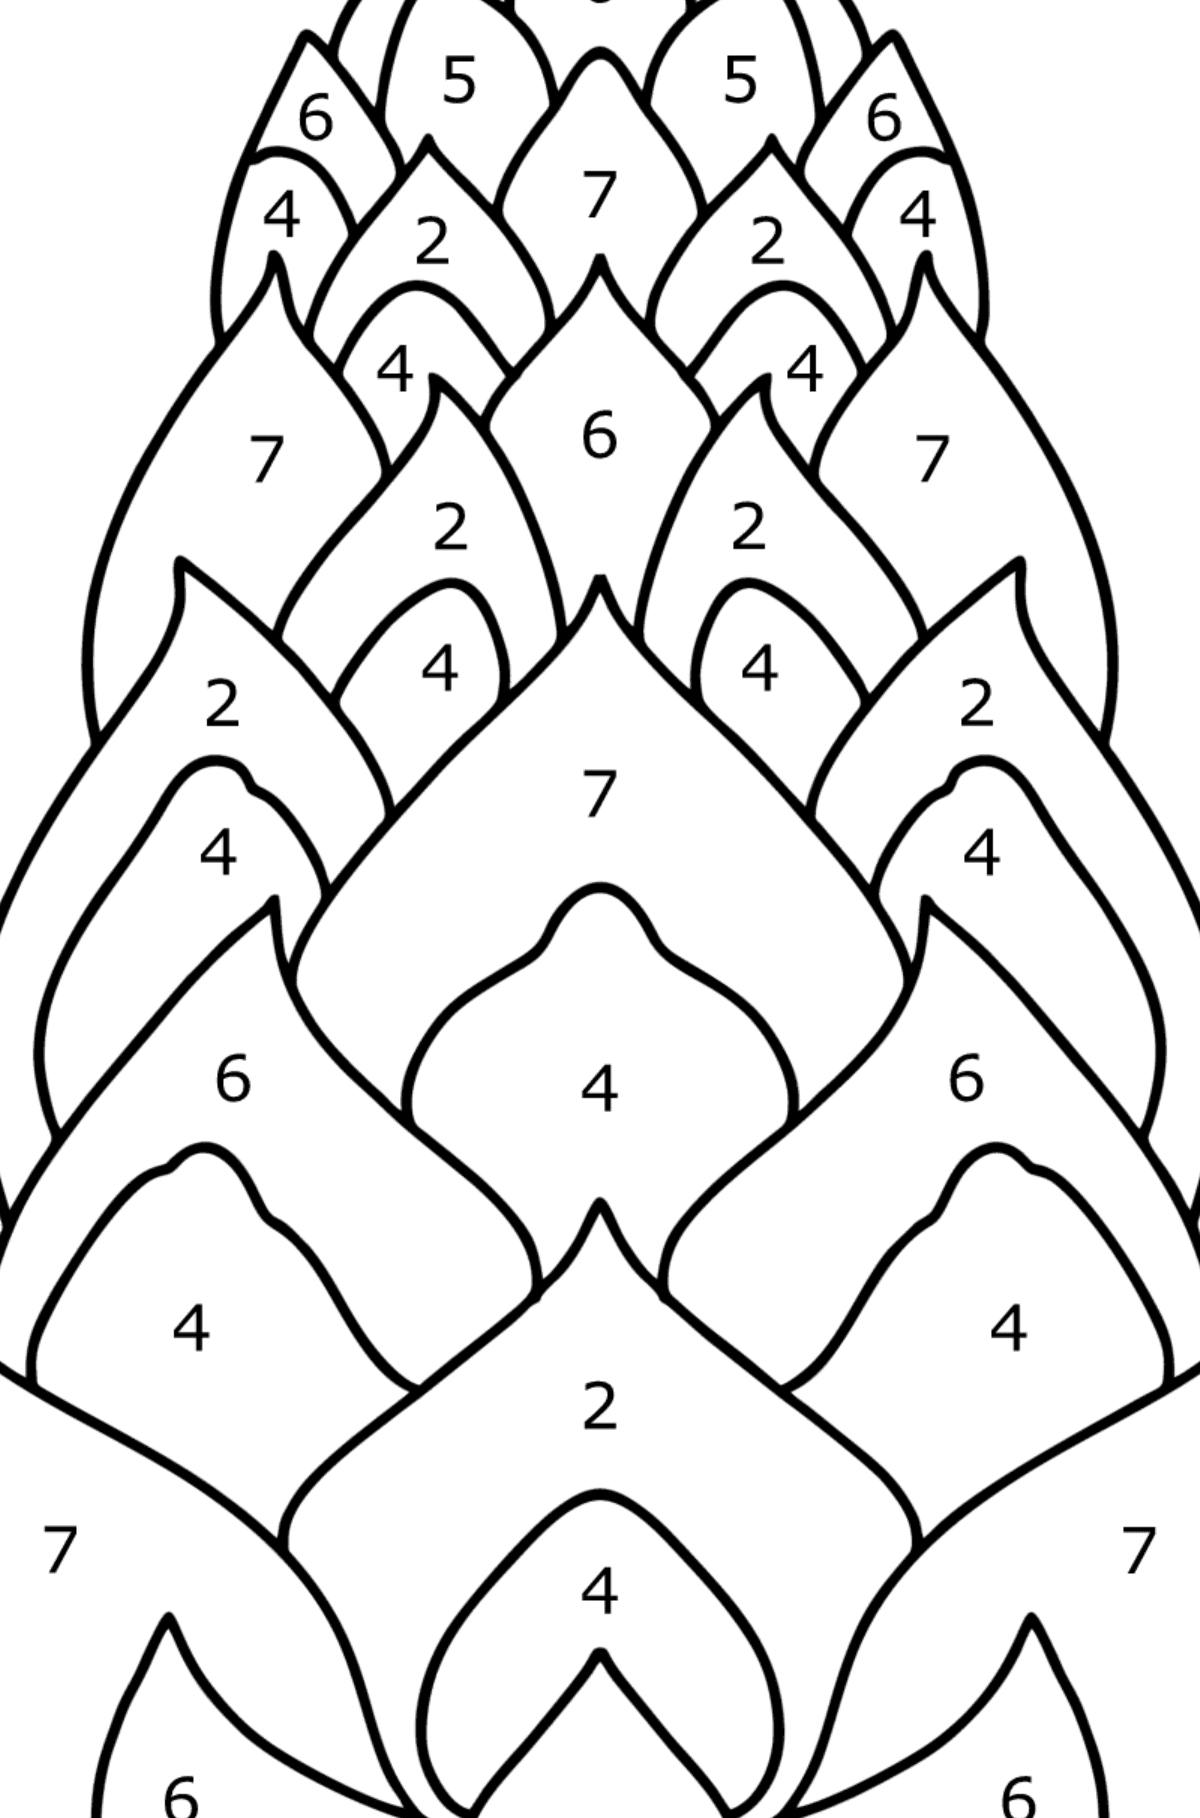 Pinecone from Lambert coloring page - Coloring by Numbers for Kids